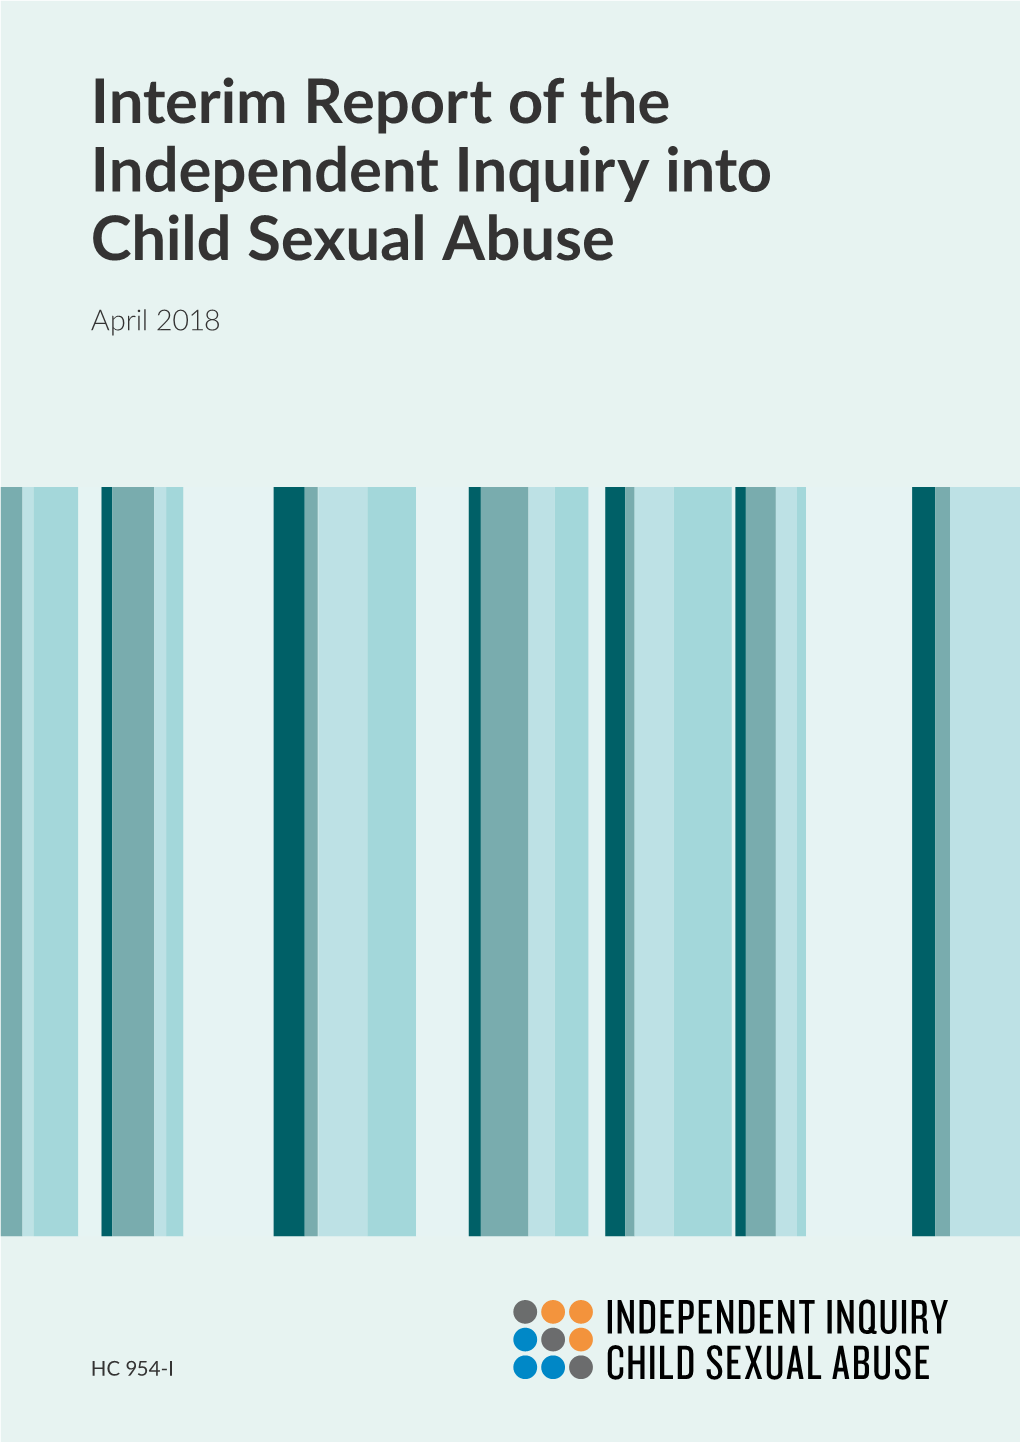 HC954-I Interim Report of the Independent Inquiry Into Child Sexual Abuse – April 2018